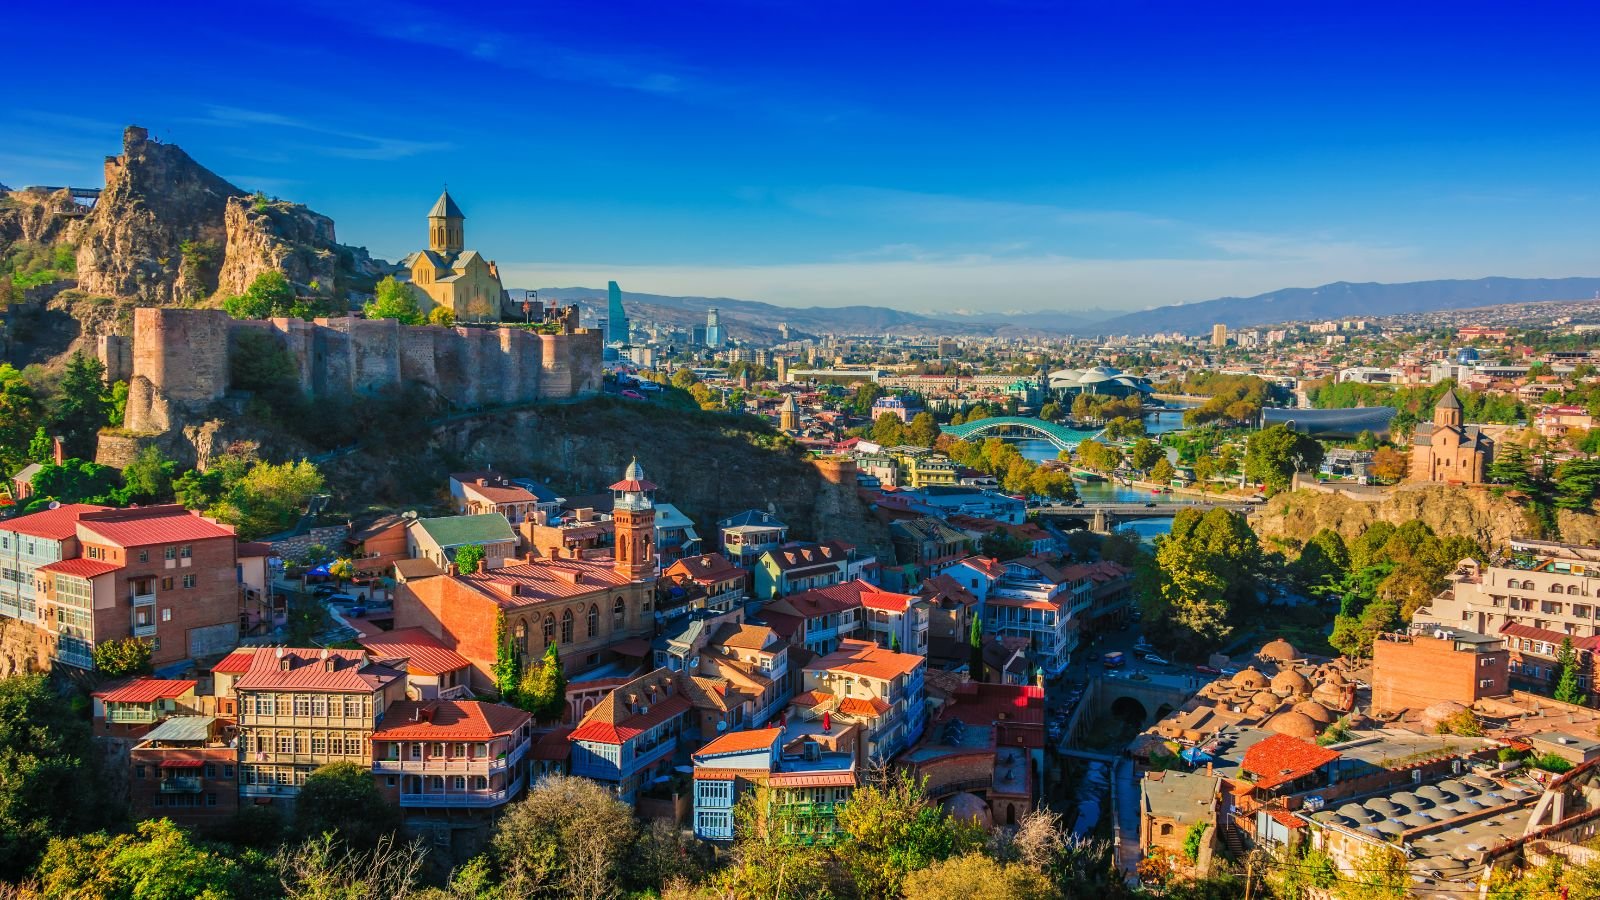 <p><a href="https://livingcost.org/cost/georgia/tbilisi" rel="noopener">Average Cost Of Living</a> (Per Person)- $513</p> <p>Average Rent and Utilities(Per Person)- $571</p> <p>Tbilisi offers an attractive option for people who seek a rich cultural experience without breaking the bank. Here, you can enjoy an affordable European lifestyle with quaint cobblestone streets, historic churches, and vibrant café culture on a budget. Tbilisi is a gateway to Georgia’s Caucasus Mountains and renowned wine regions, making it ideal for history buffs and outdoor enthusiasts.</p>